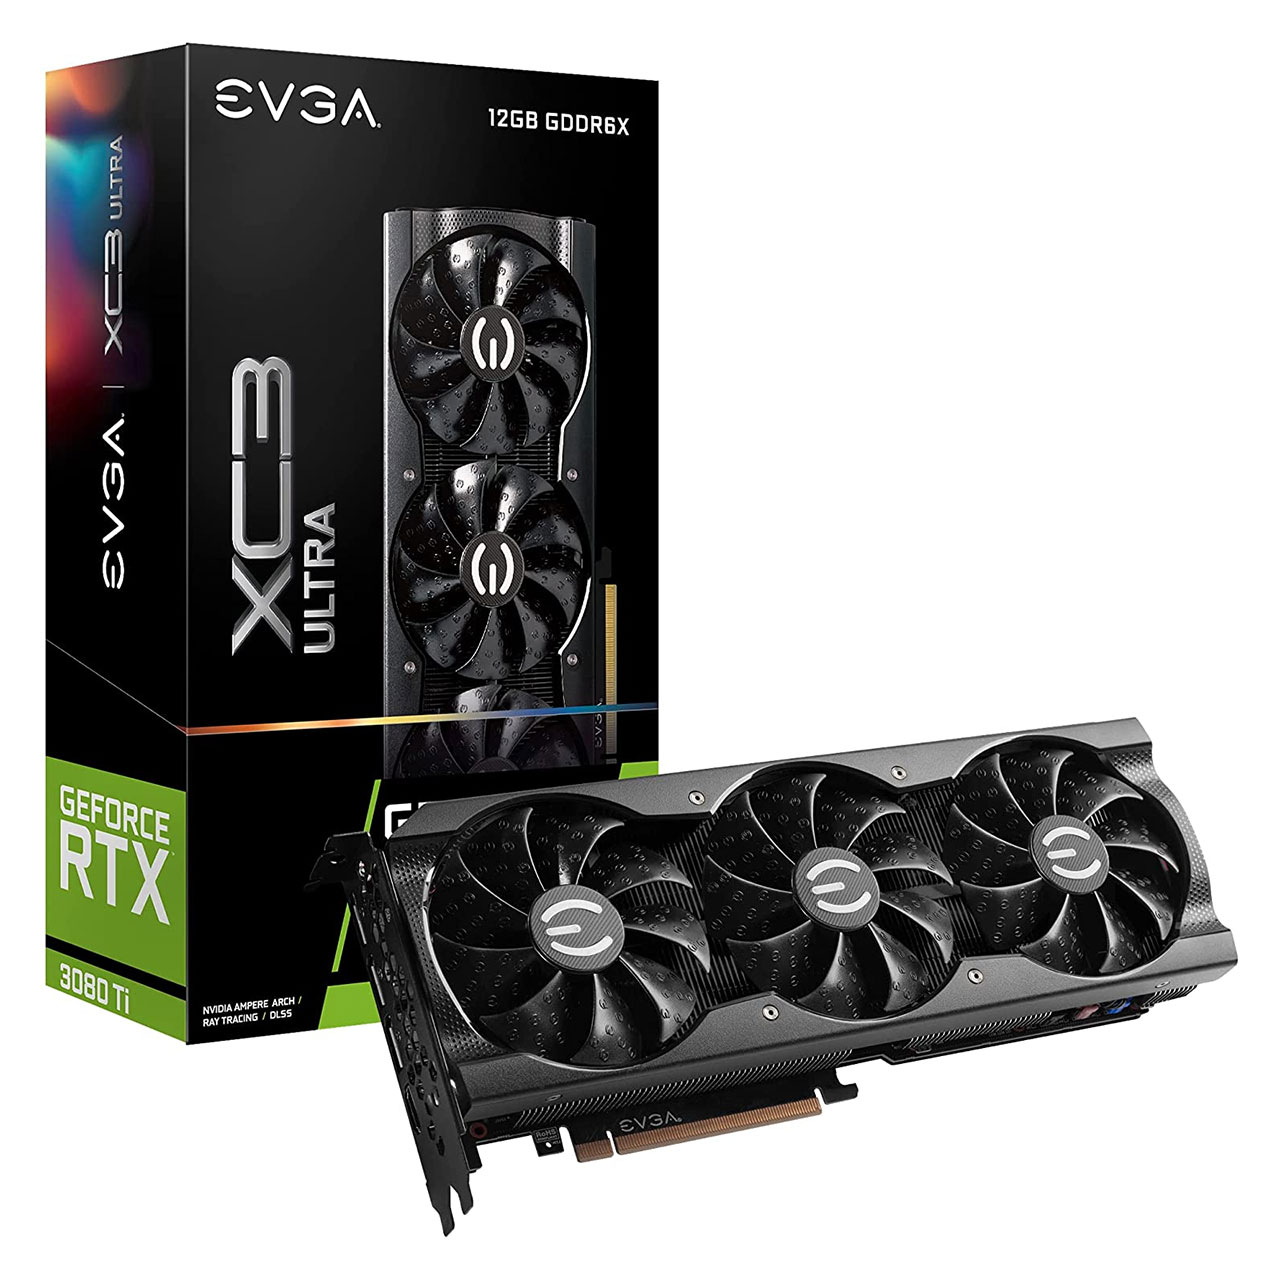 The best GPU deals currently available